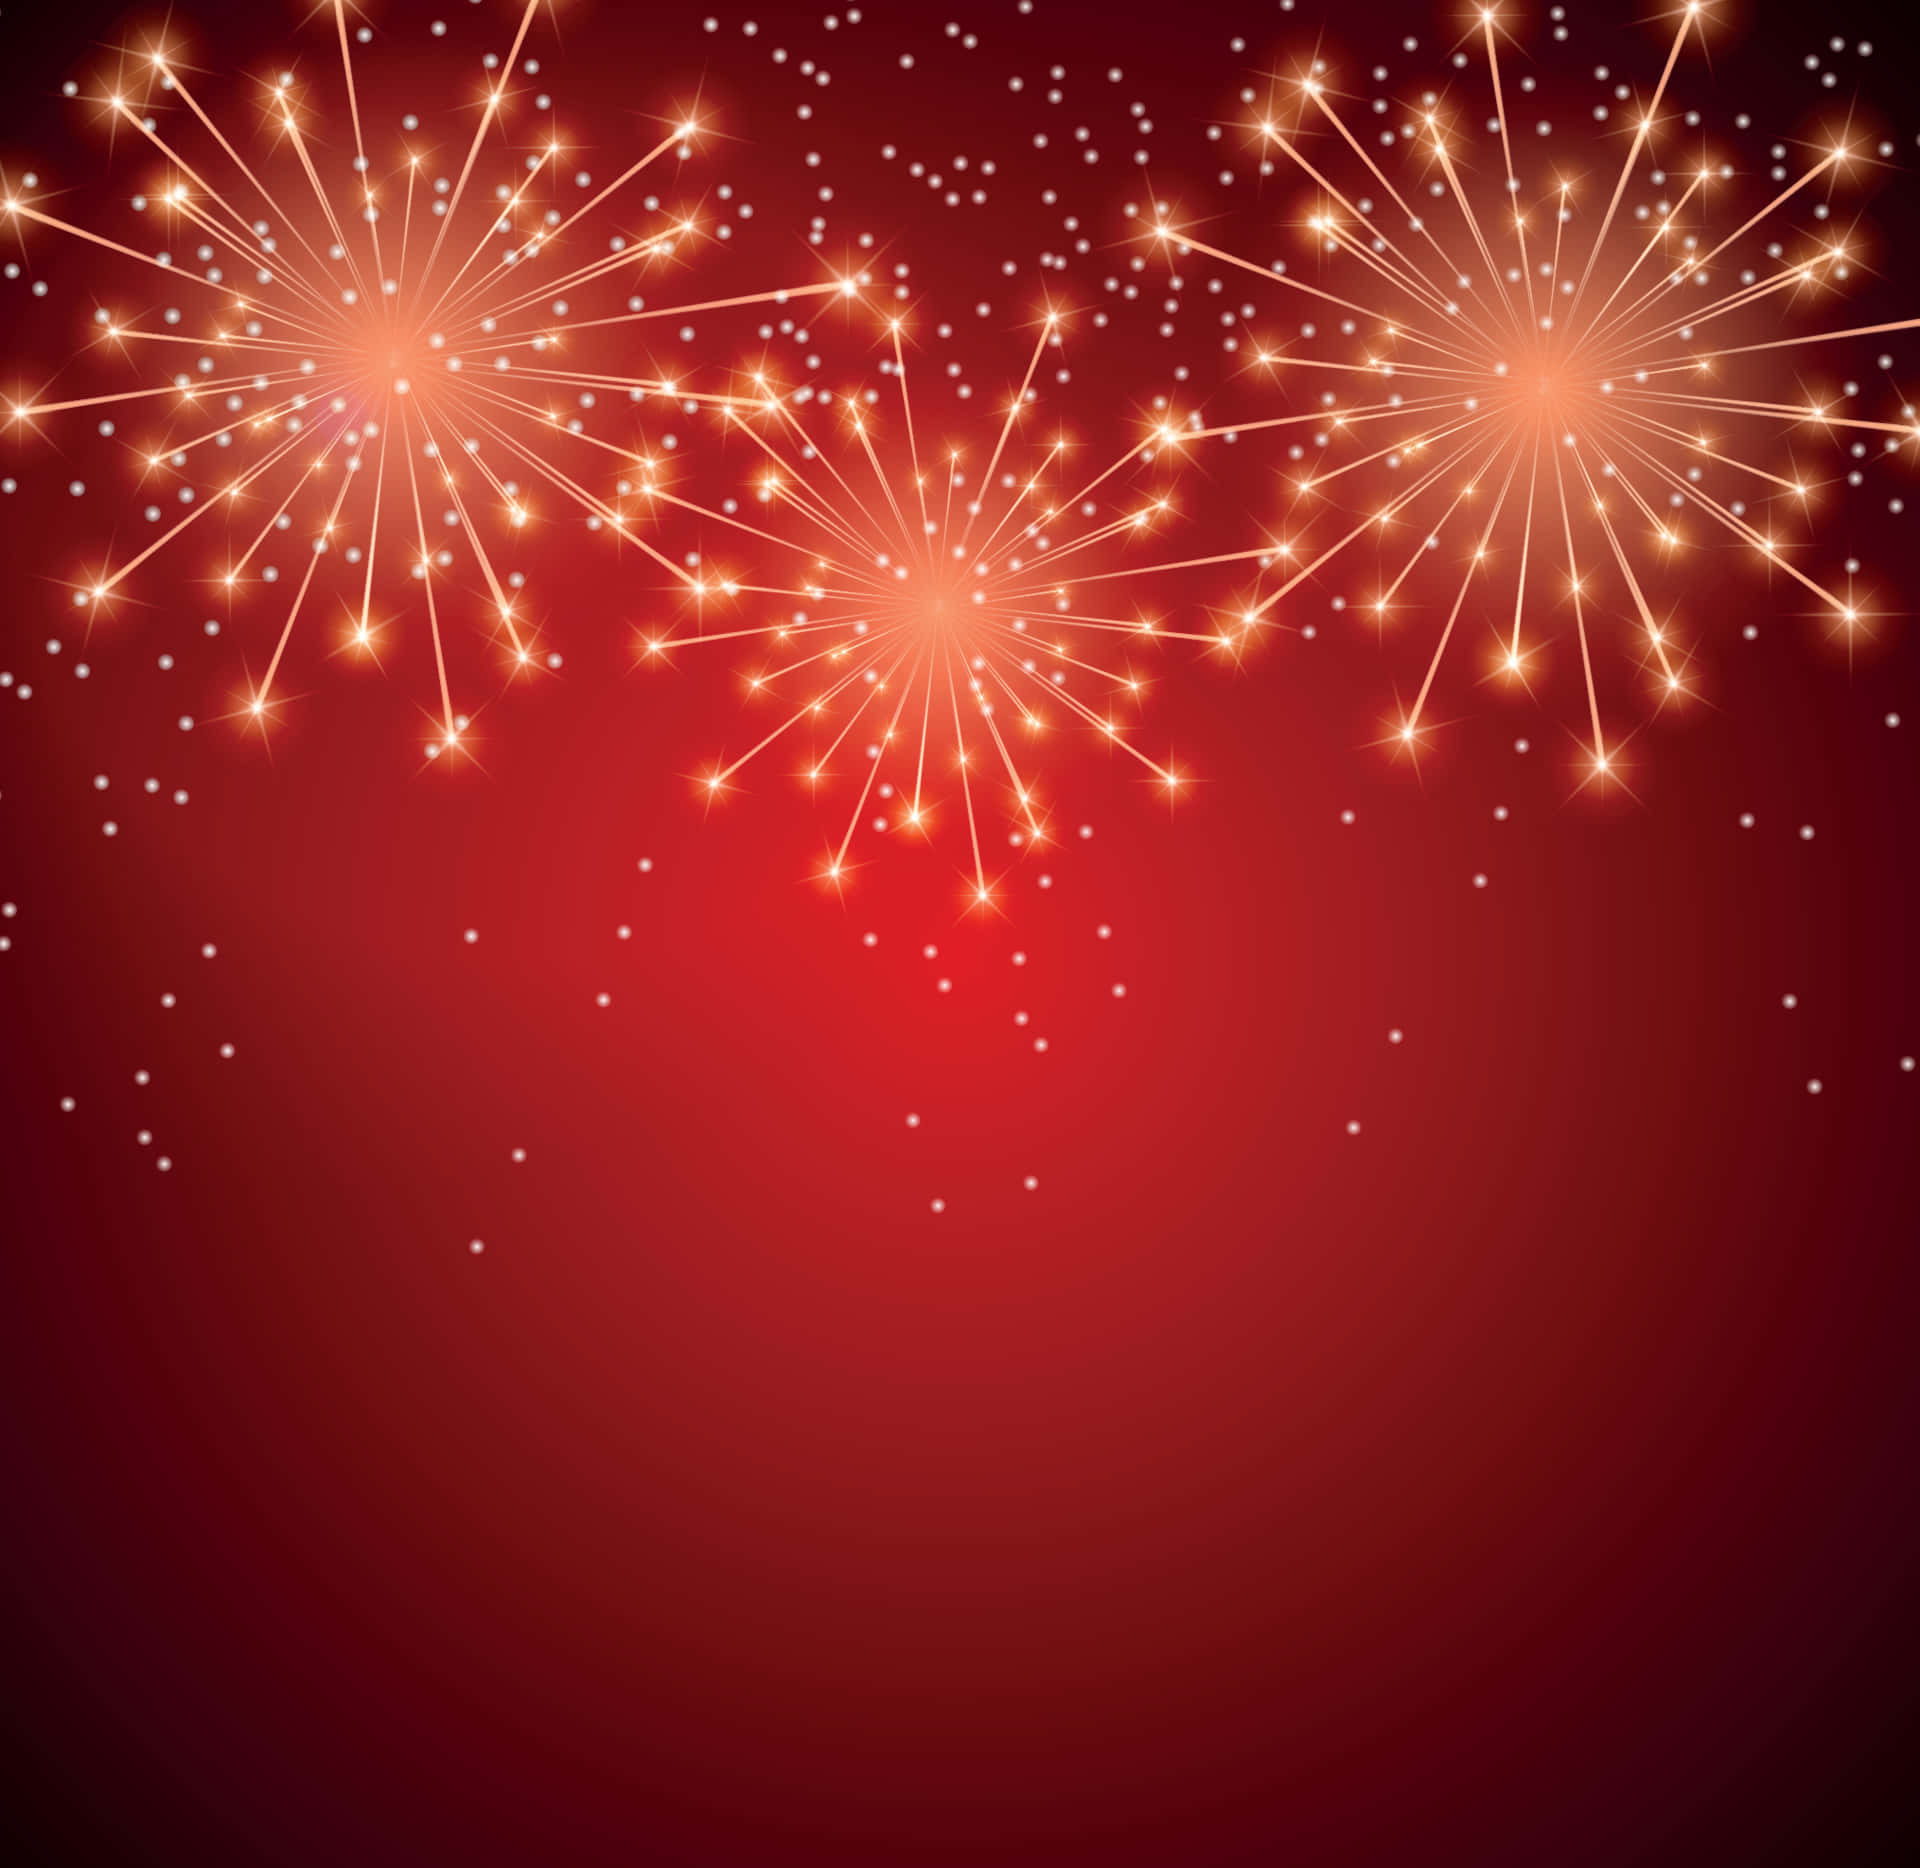 Chinese New Year Fireworks Background Poster Background